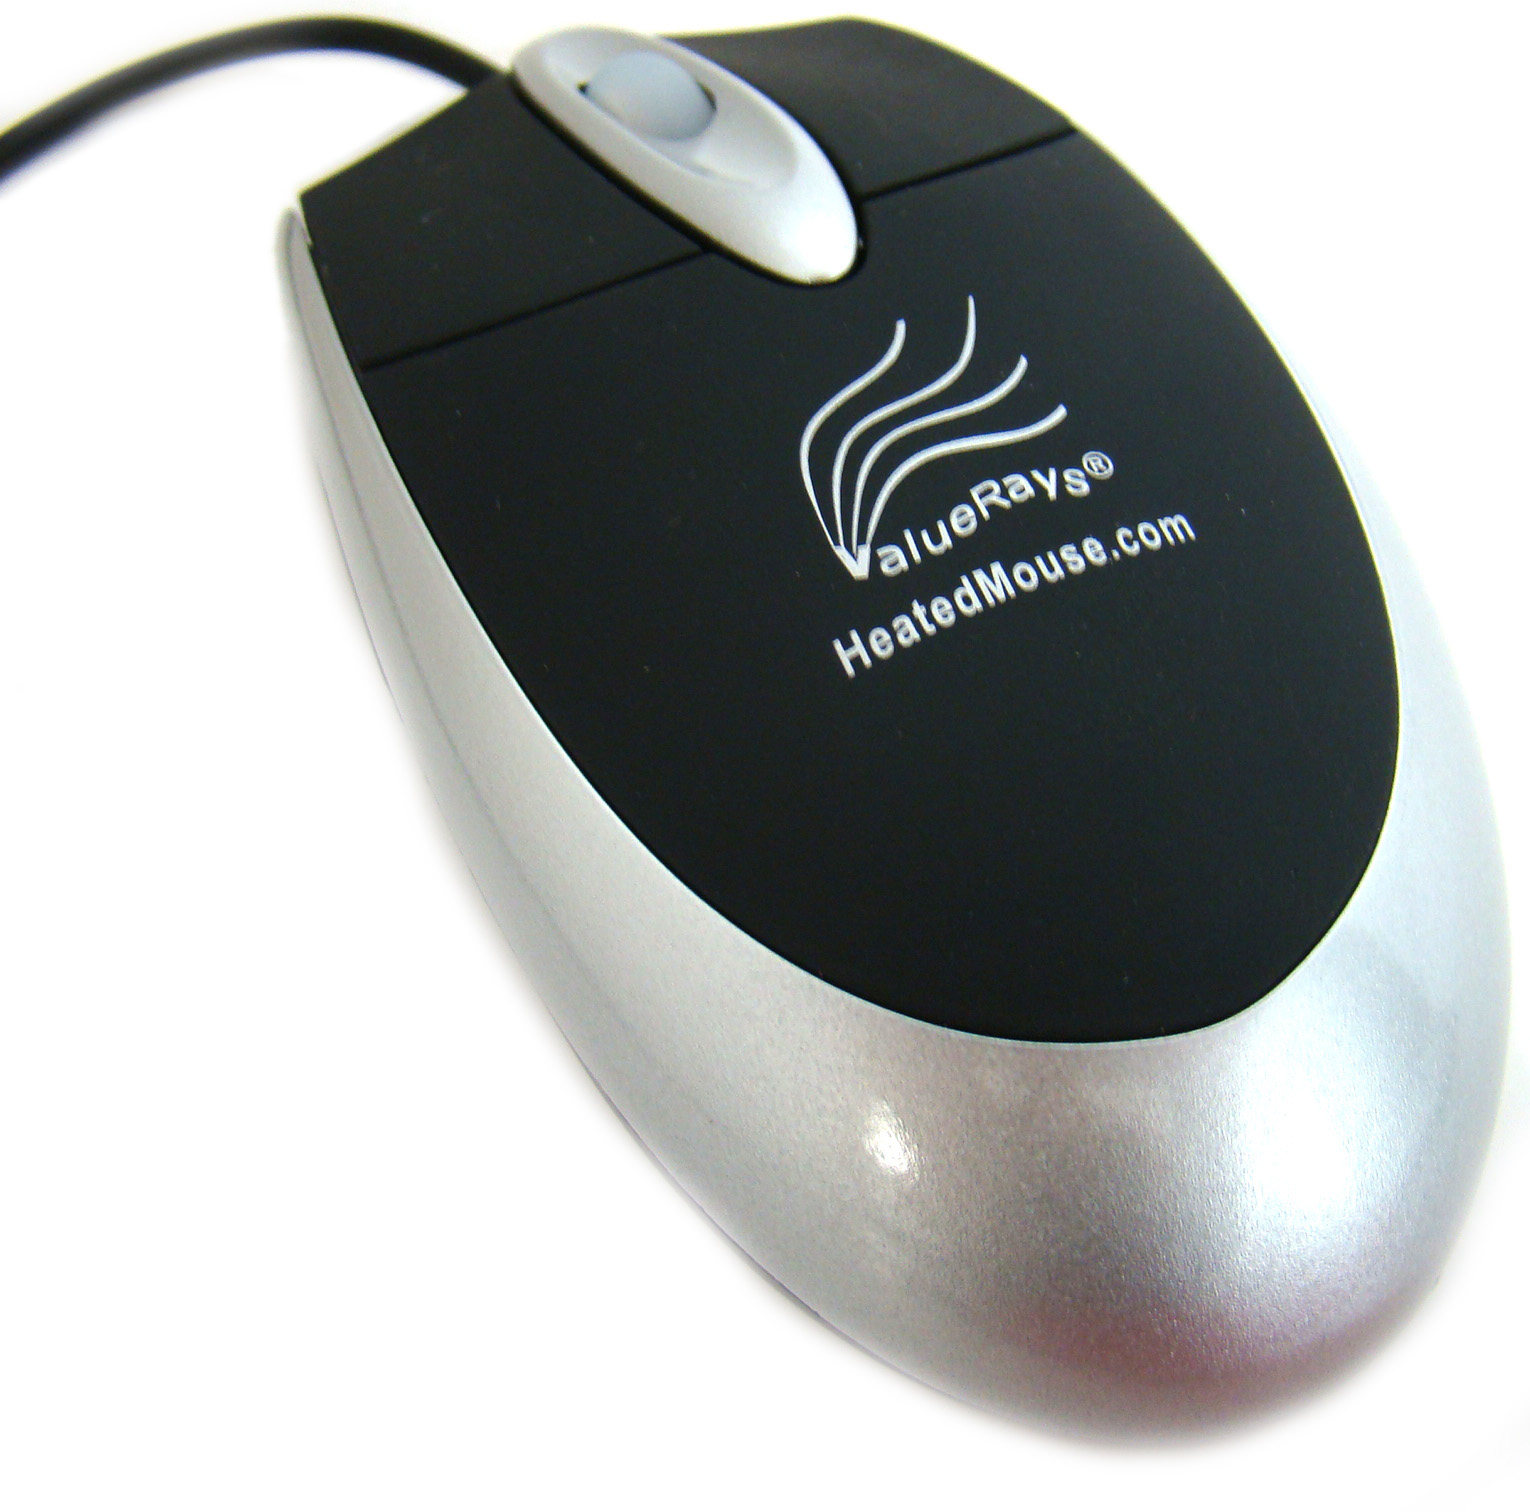 ValueRays® Executive Series Heated Mouse - The Black CEO Warm Mouse